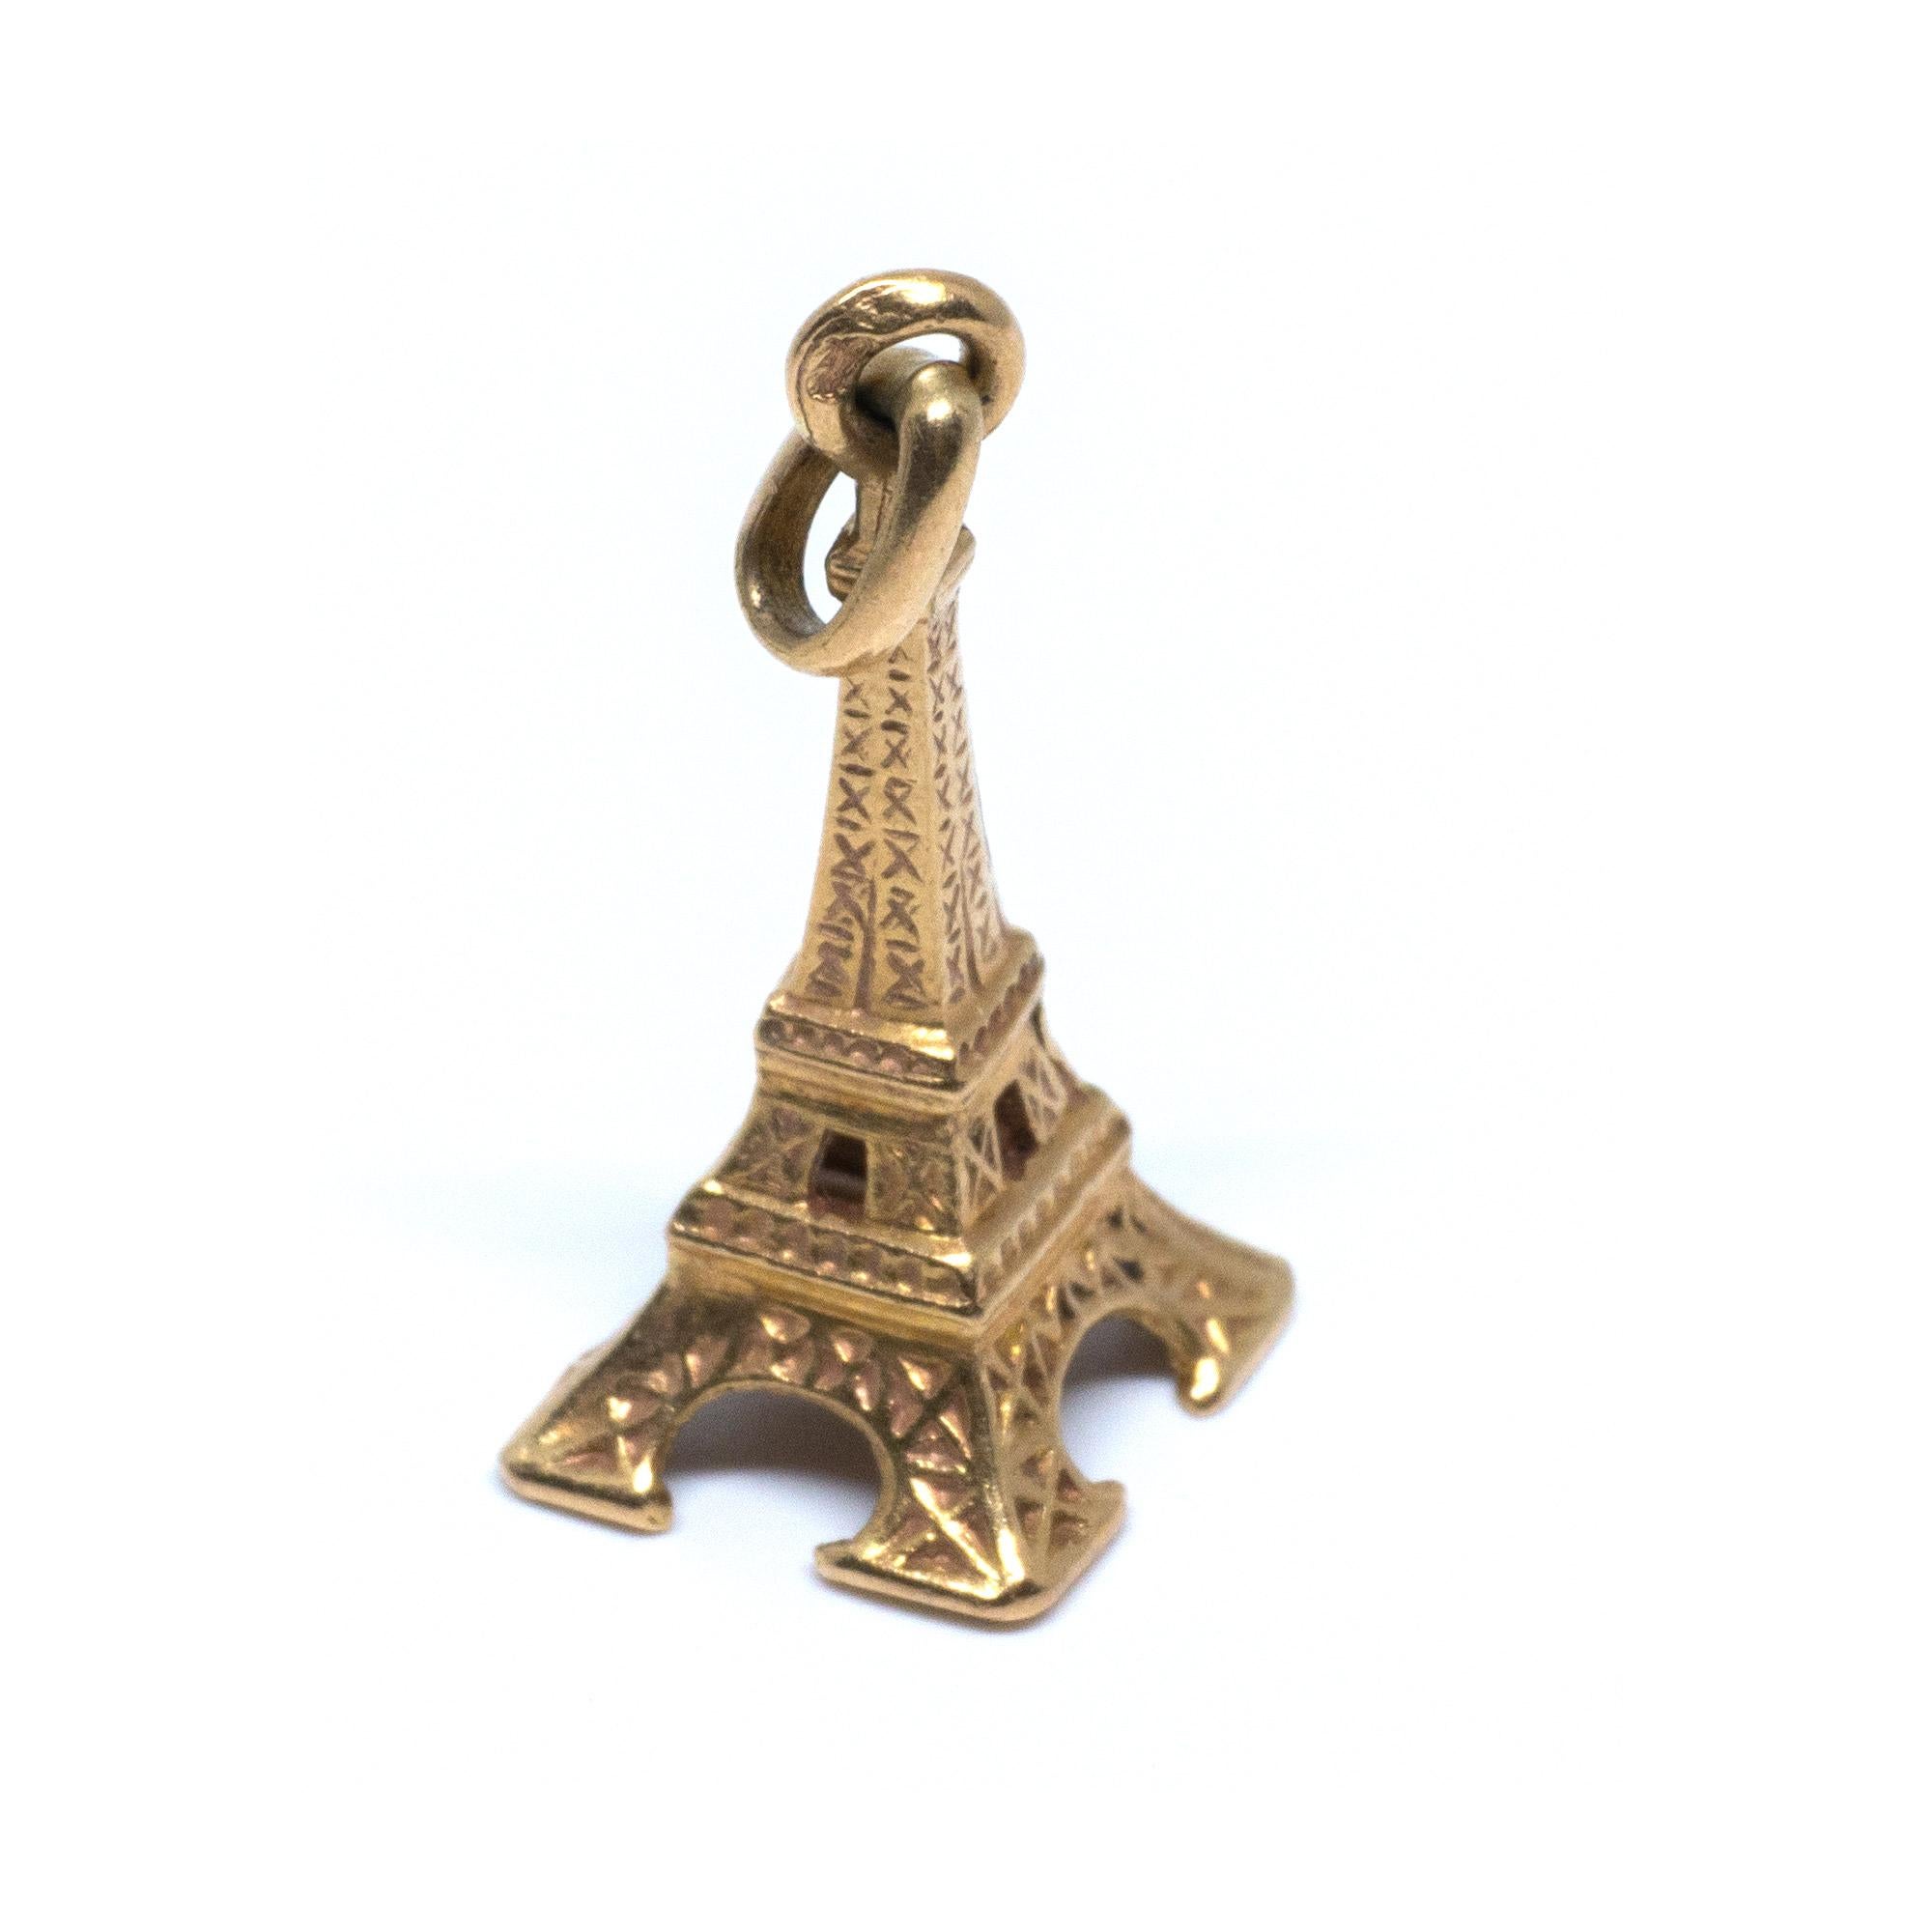 Relive a trip to the city of lights with this iconic charm. Bring back fond memories of your time in Paris. 

Charm details:
Metal: 14 Karat Yellow Gold
Weight: 1.1 grams

Payment & Refund Details:
*More Pictures Available on Request*

Payment via